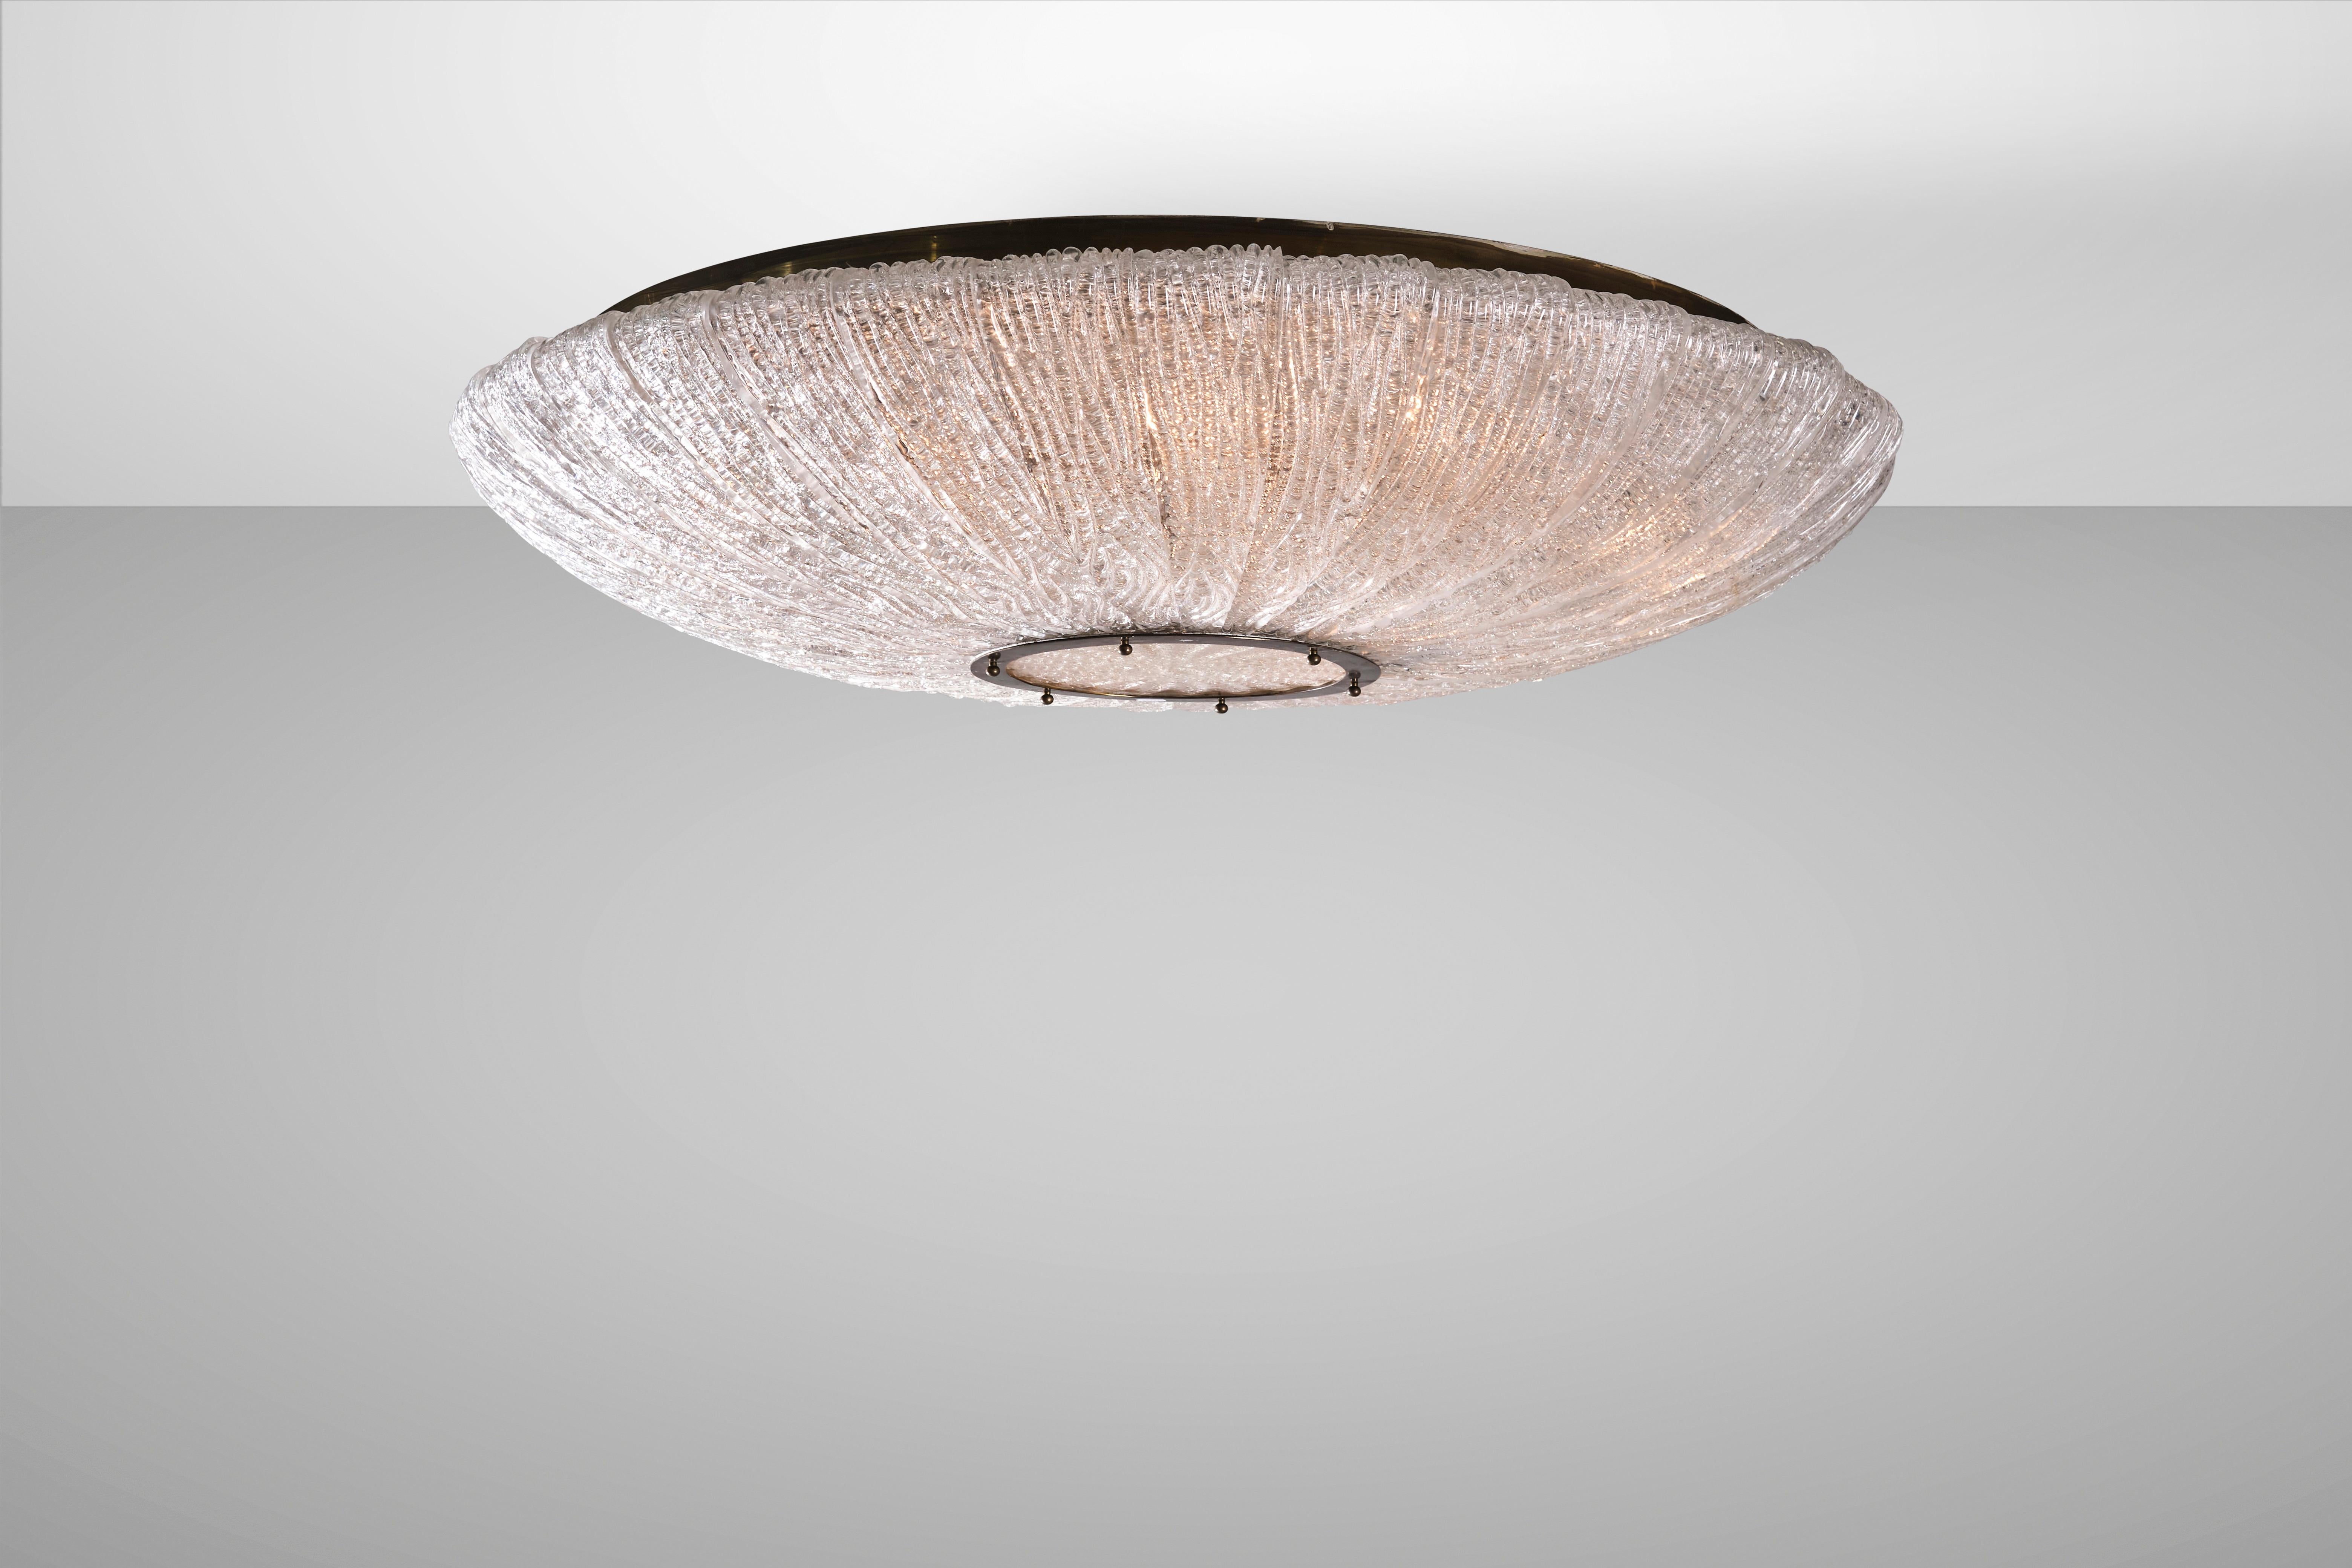 Elegant and timeless, Murano glass ceiling lamps are varied and diverse but each carries with it the aura of the wisdom of the lagoon's master glassmakers. This ceiling light from the 1940s is made of metal and brass with Corteccia (bark) glass